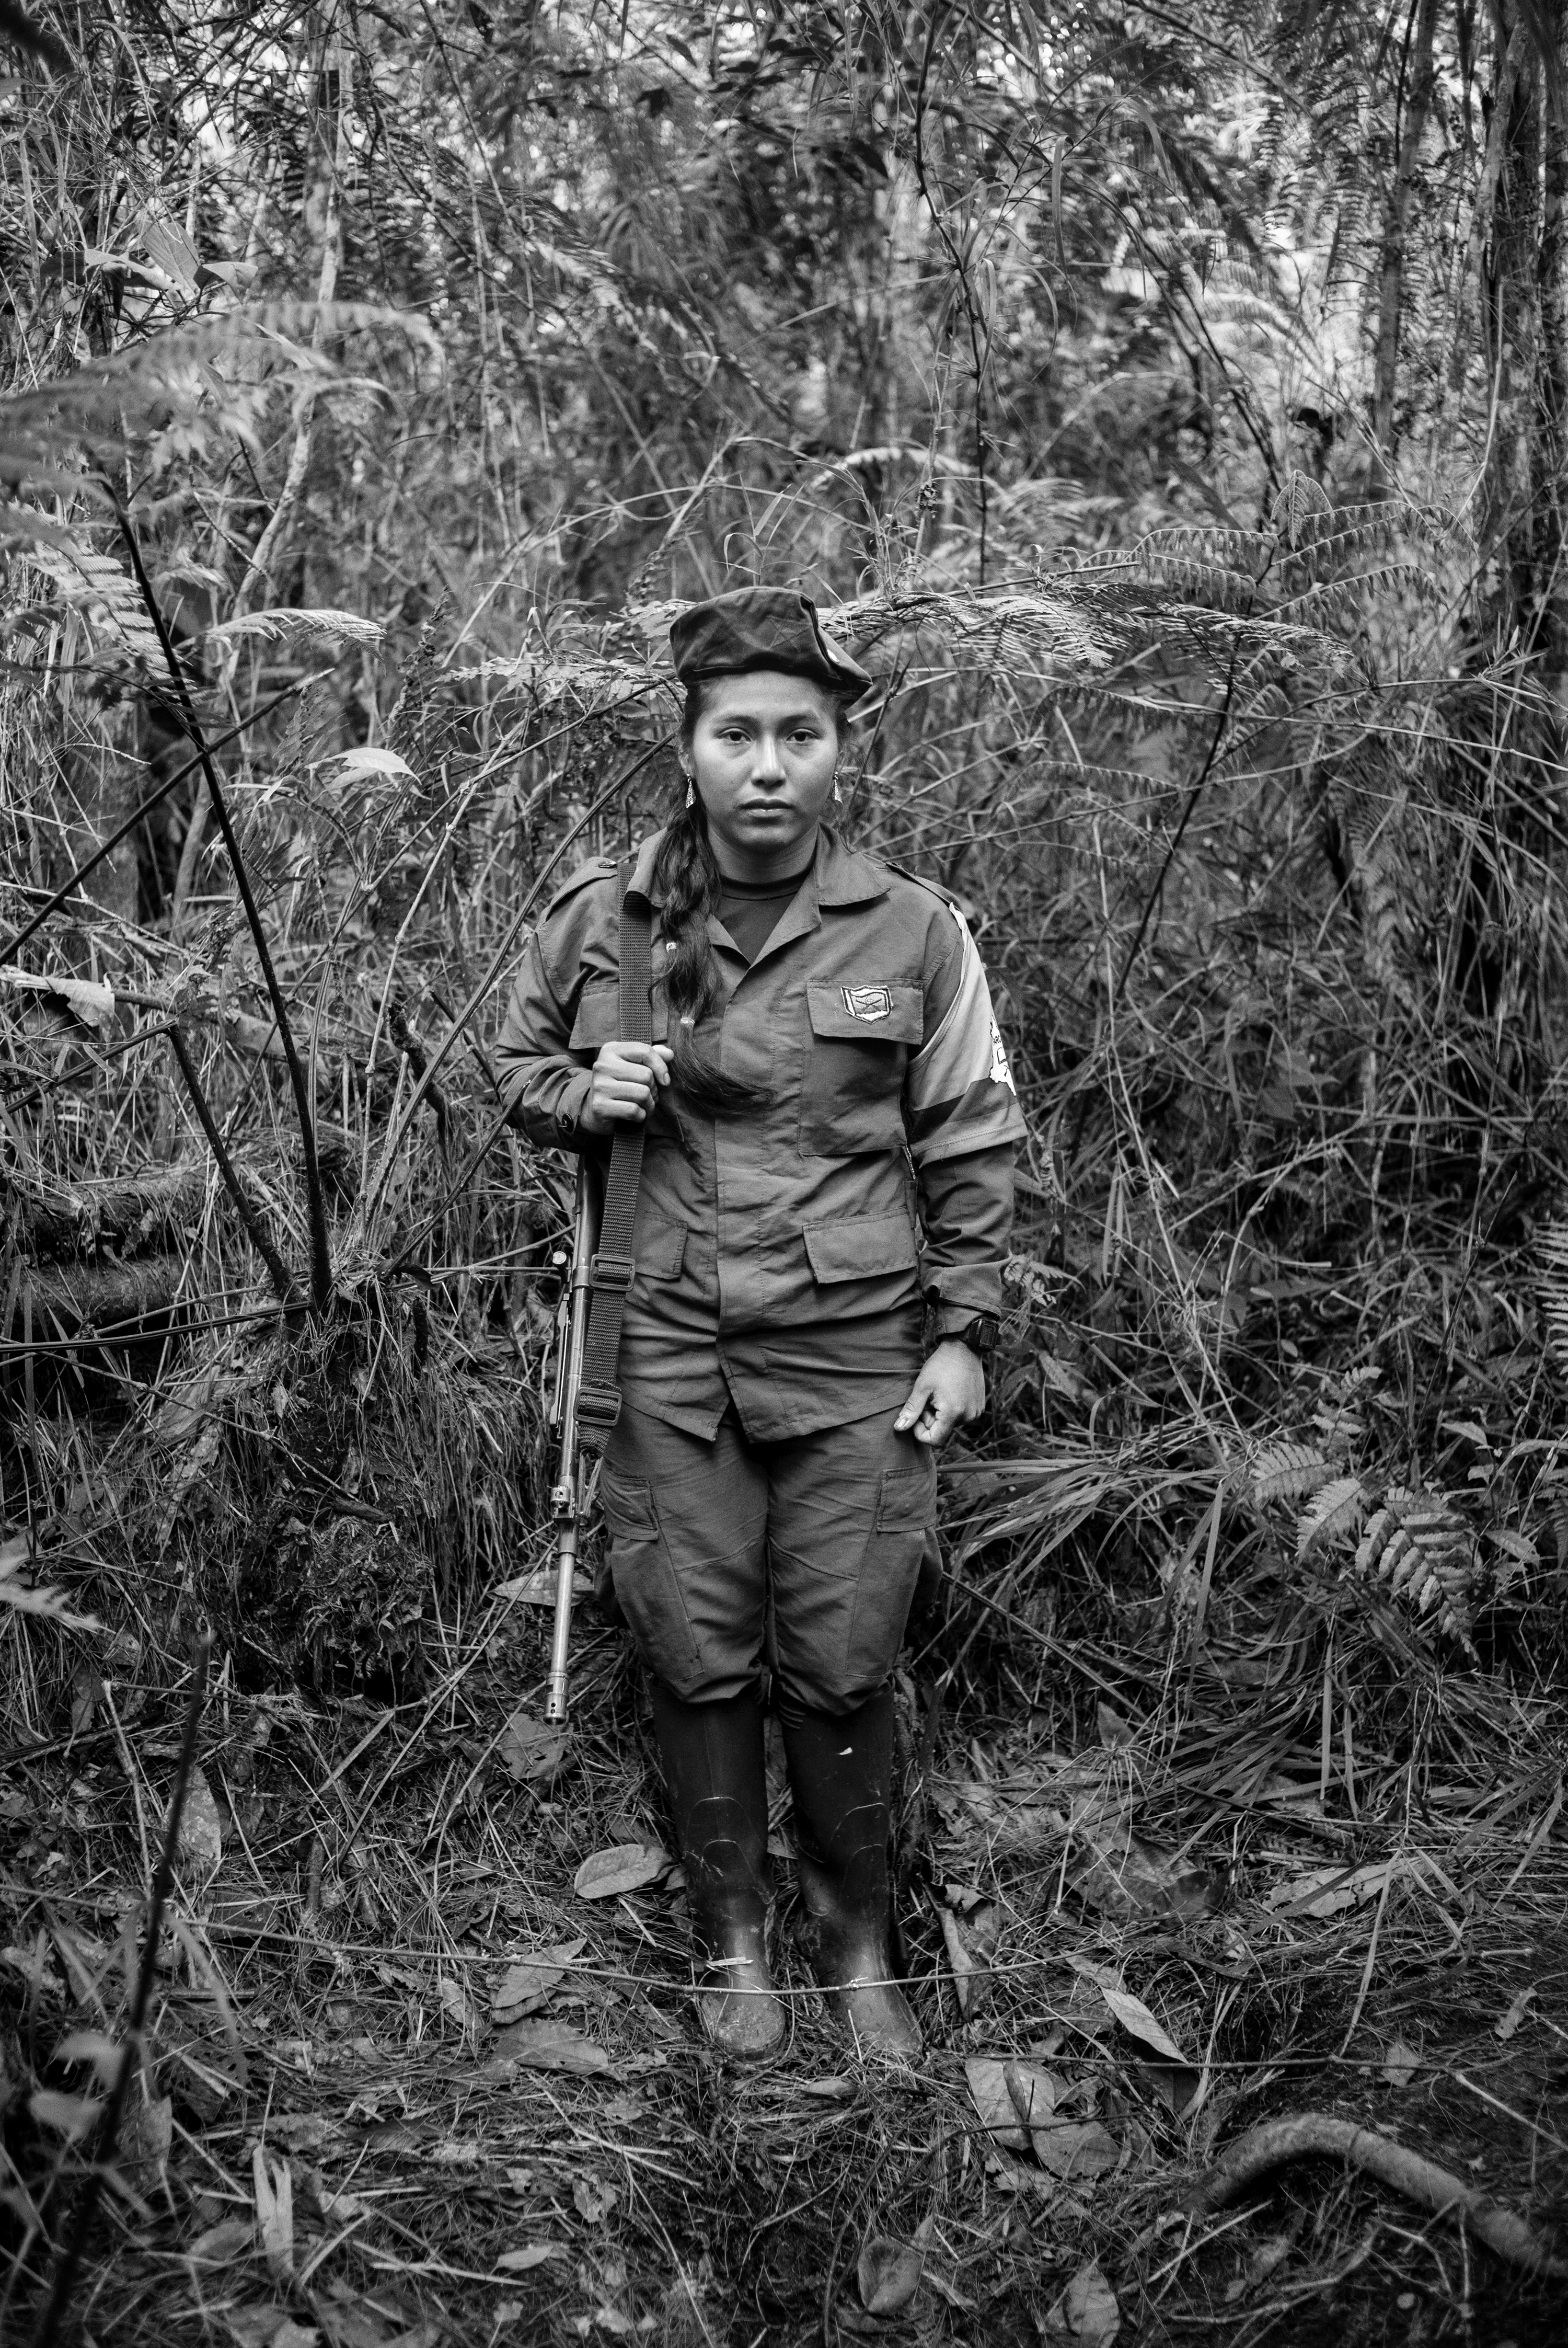 Portrait of Vicky, a member of FARC, at a camp, Cauca, Colombia, July 2016.